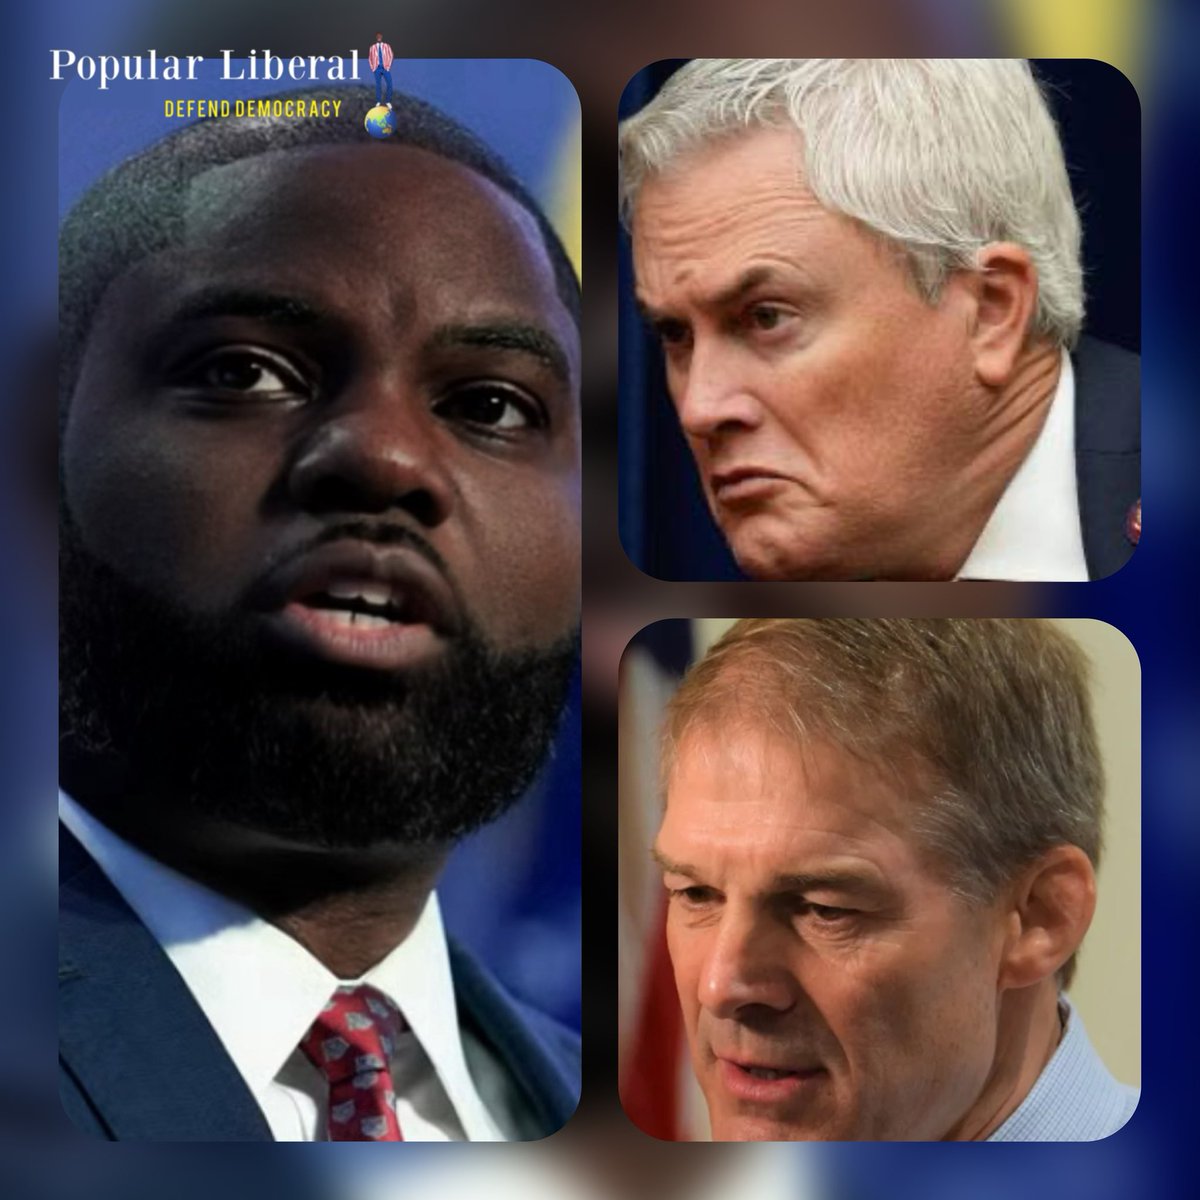 RESIGN NOW FRAUDS: Demands for the resignations of James Comer, Byron Donalds, and Jim Jordan are growing after reports of Russian intelligence interference and whistleblower fraud that led to false information being disseminated to the American public about Hunter Biden and…